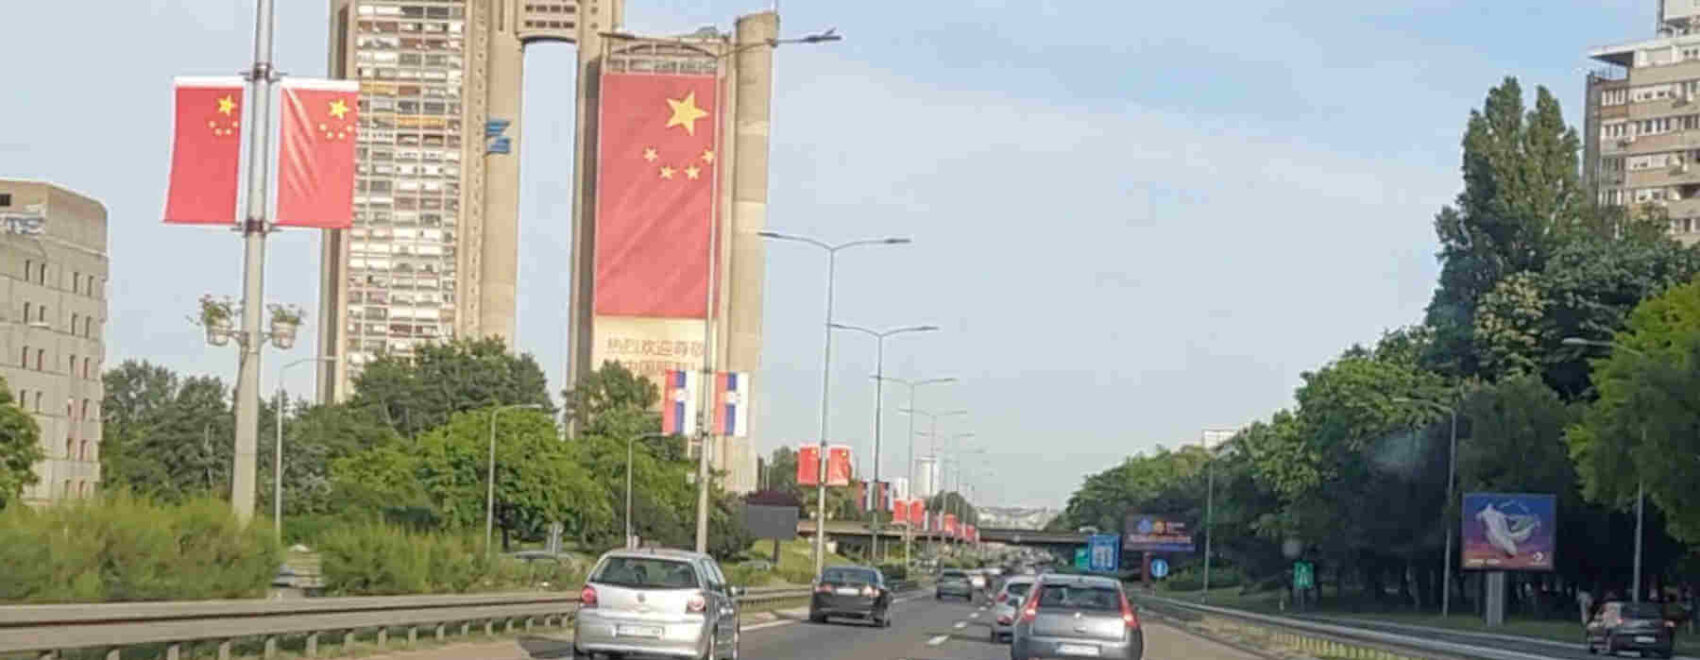 Chinese flags adorn the highway in Belgrade and the Genex Tower